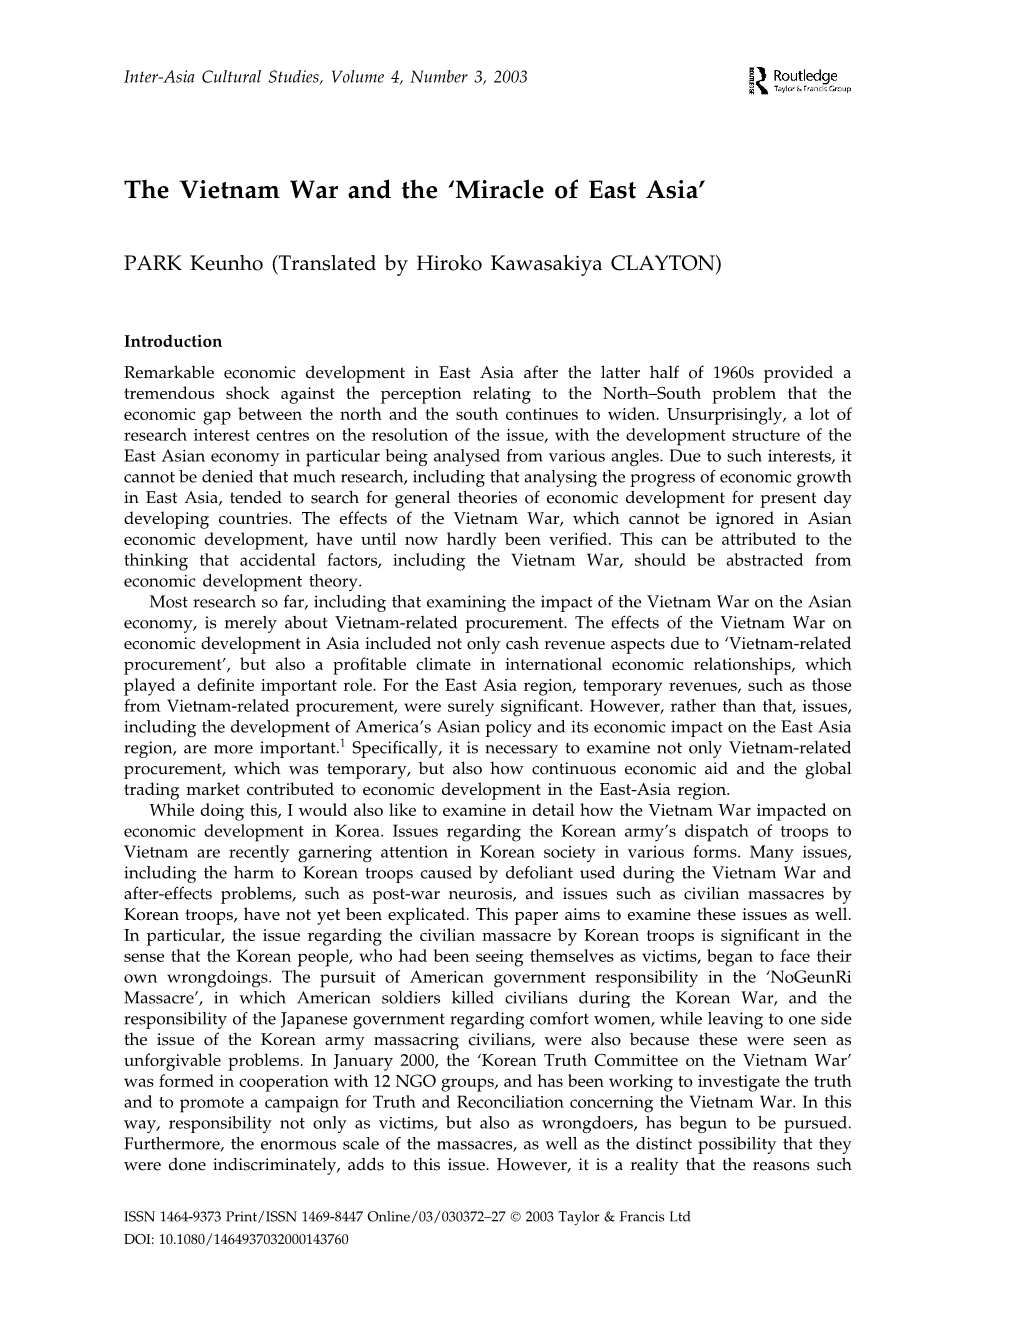 The Vietnam War and the 'Miracle of East Asia'